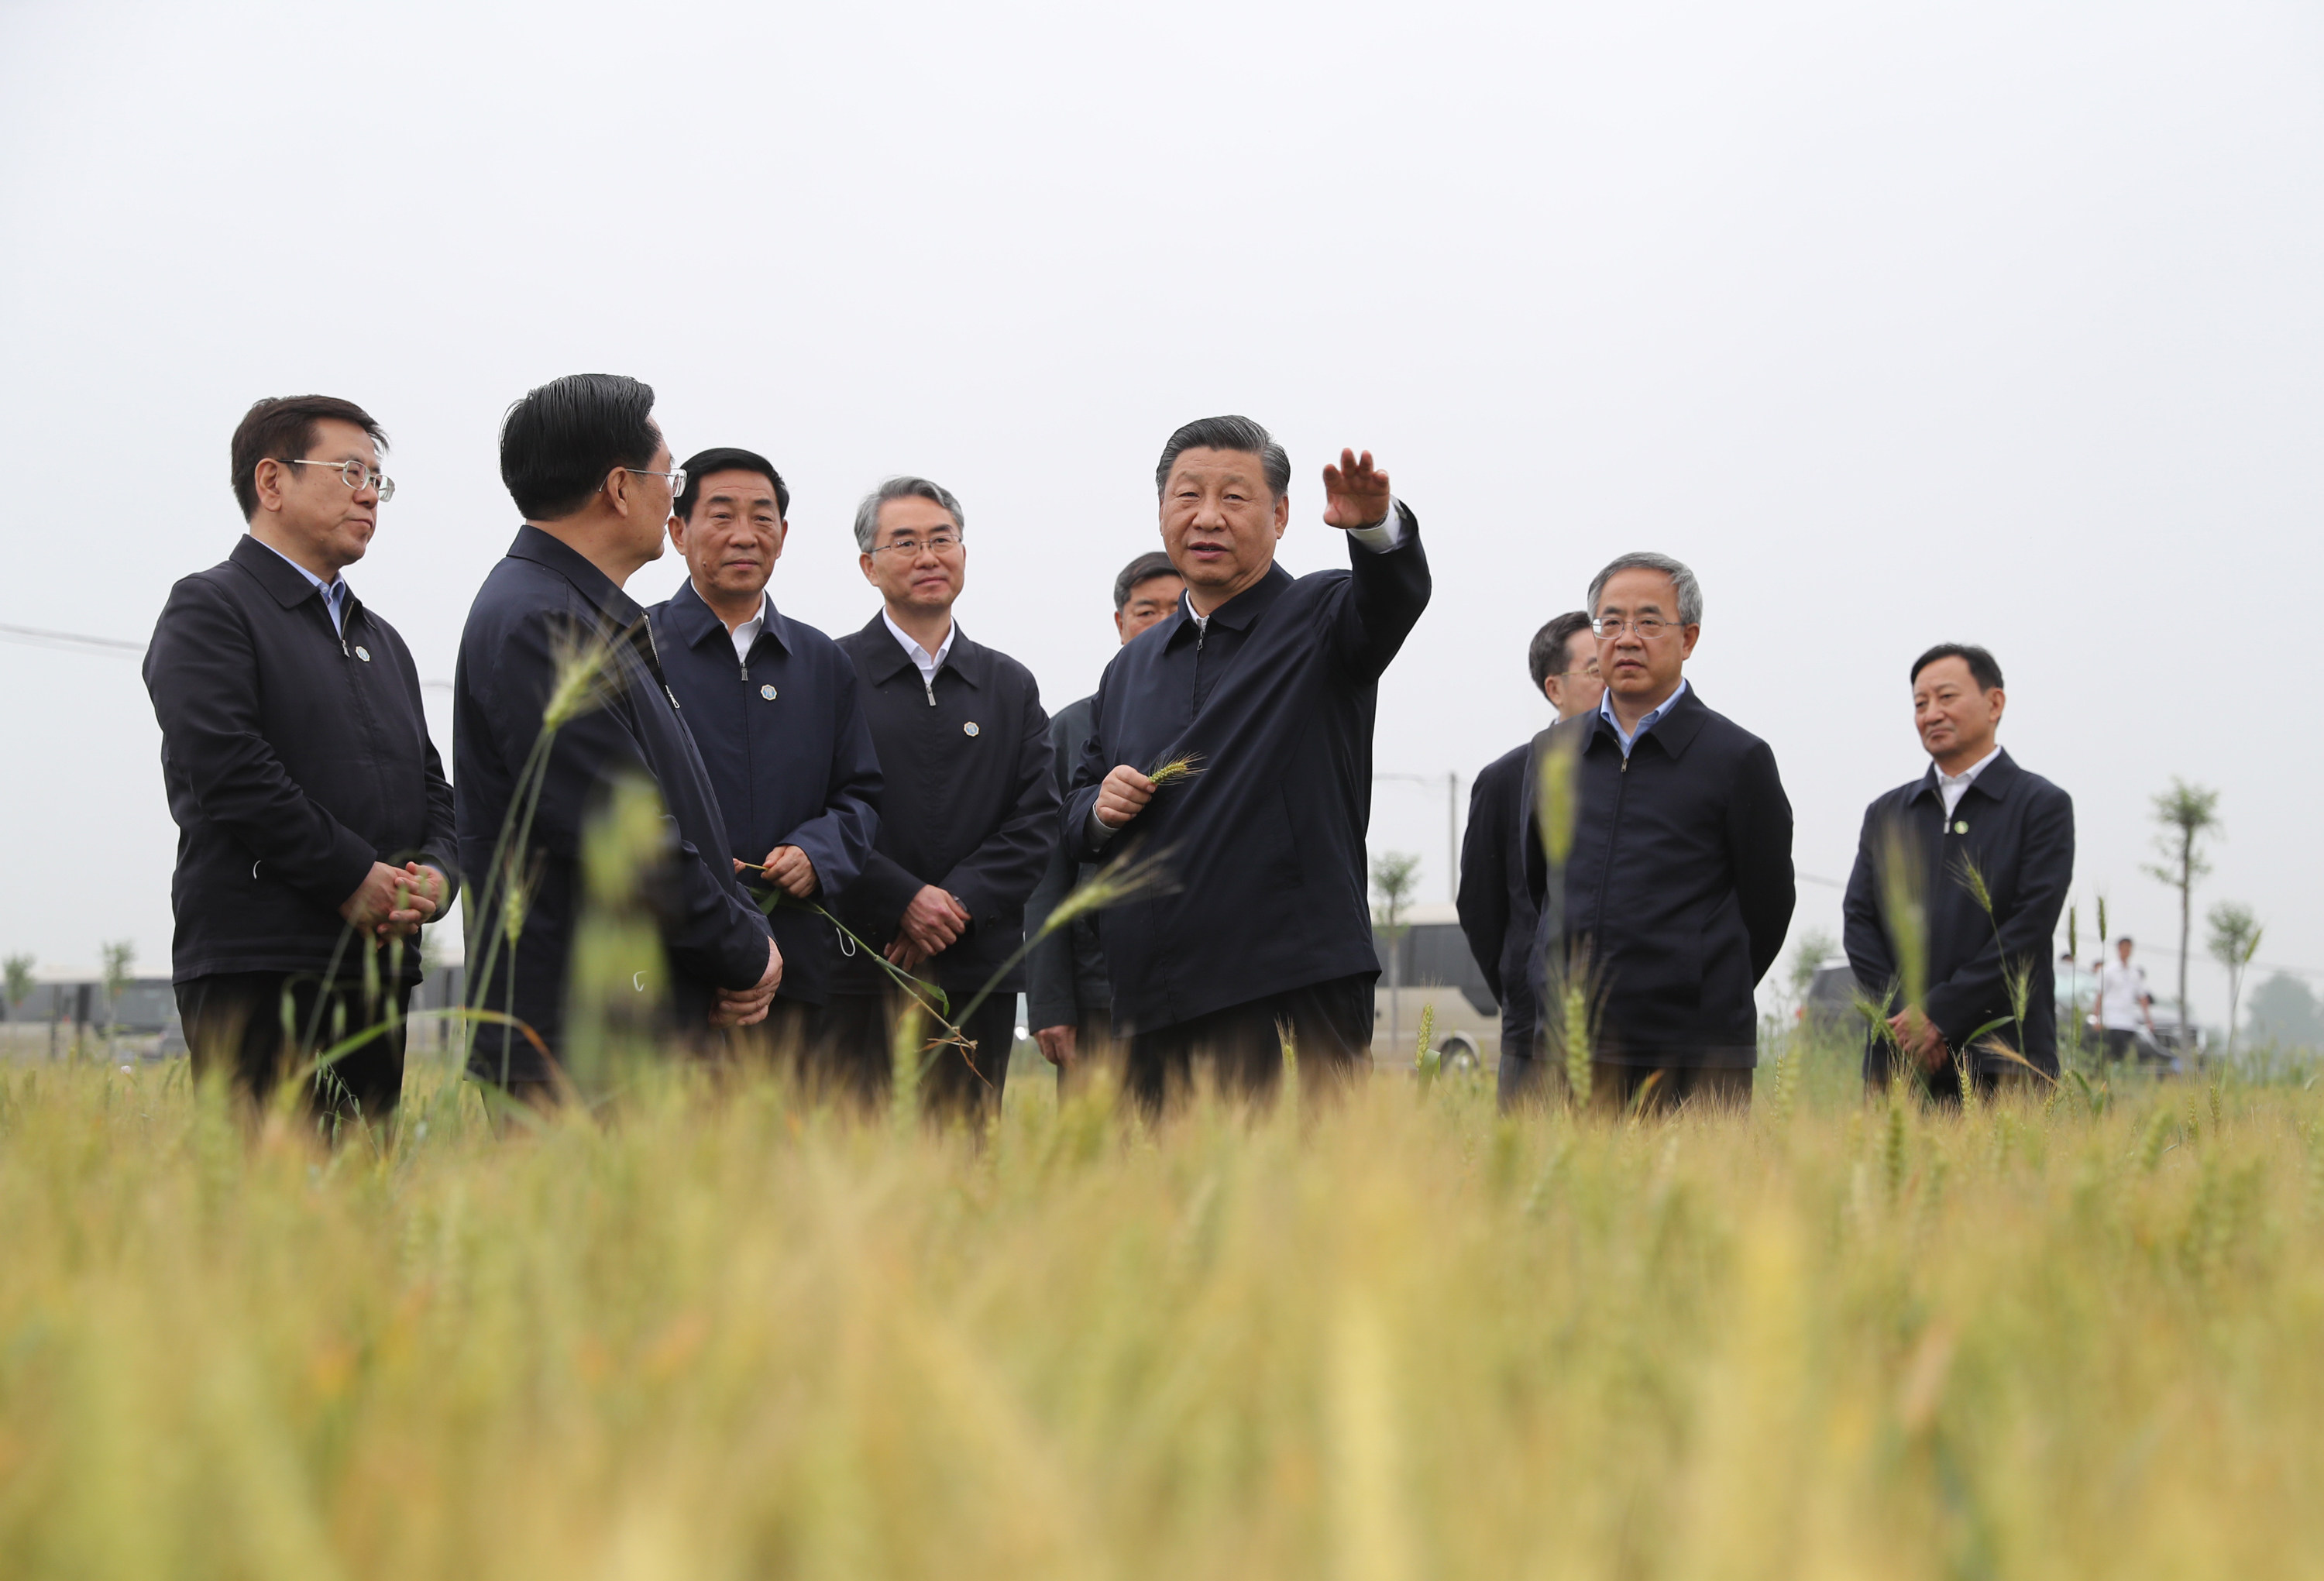 President Xi Jinping has emphasised his calls to “put rural revitalisation in a prominent position” in the development of China. Photo: Xinhua 